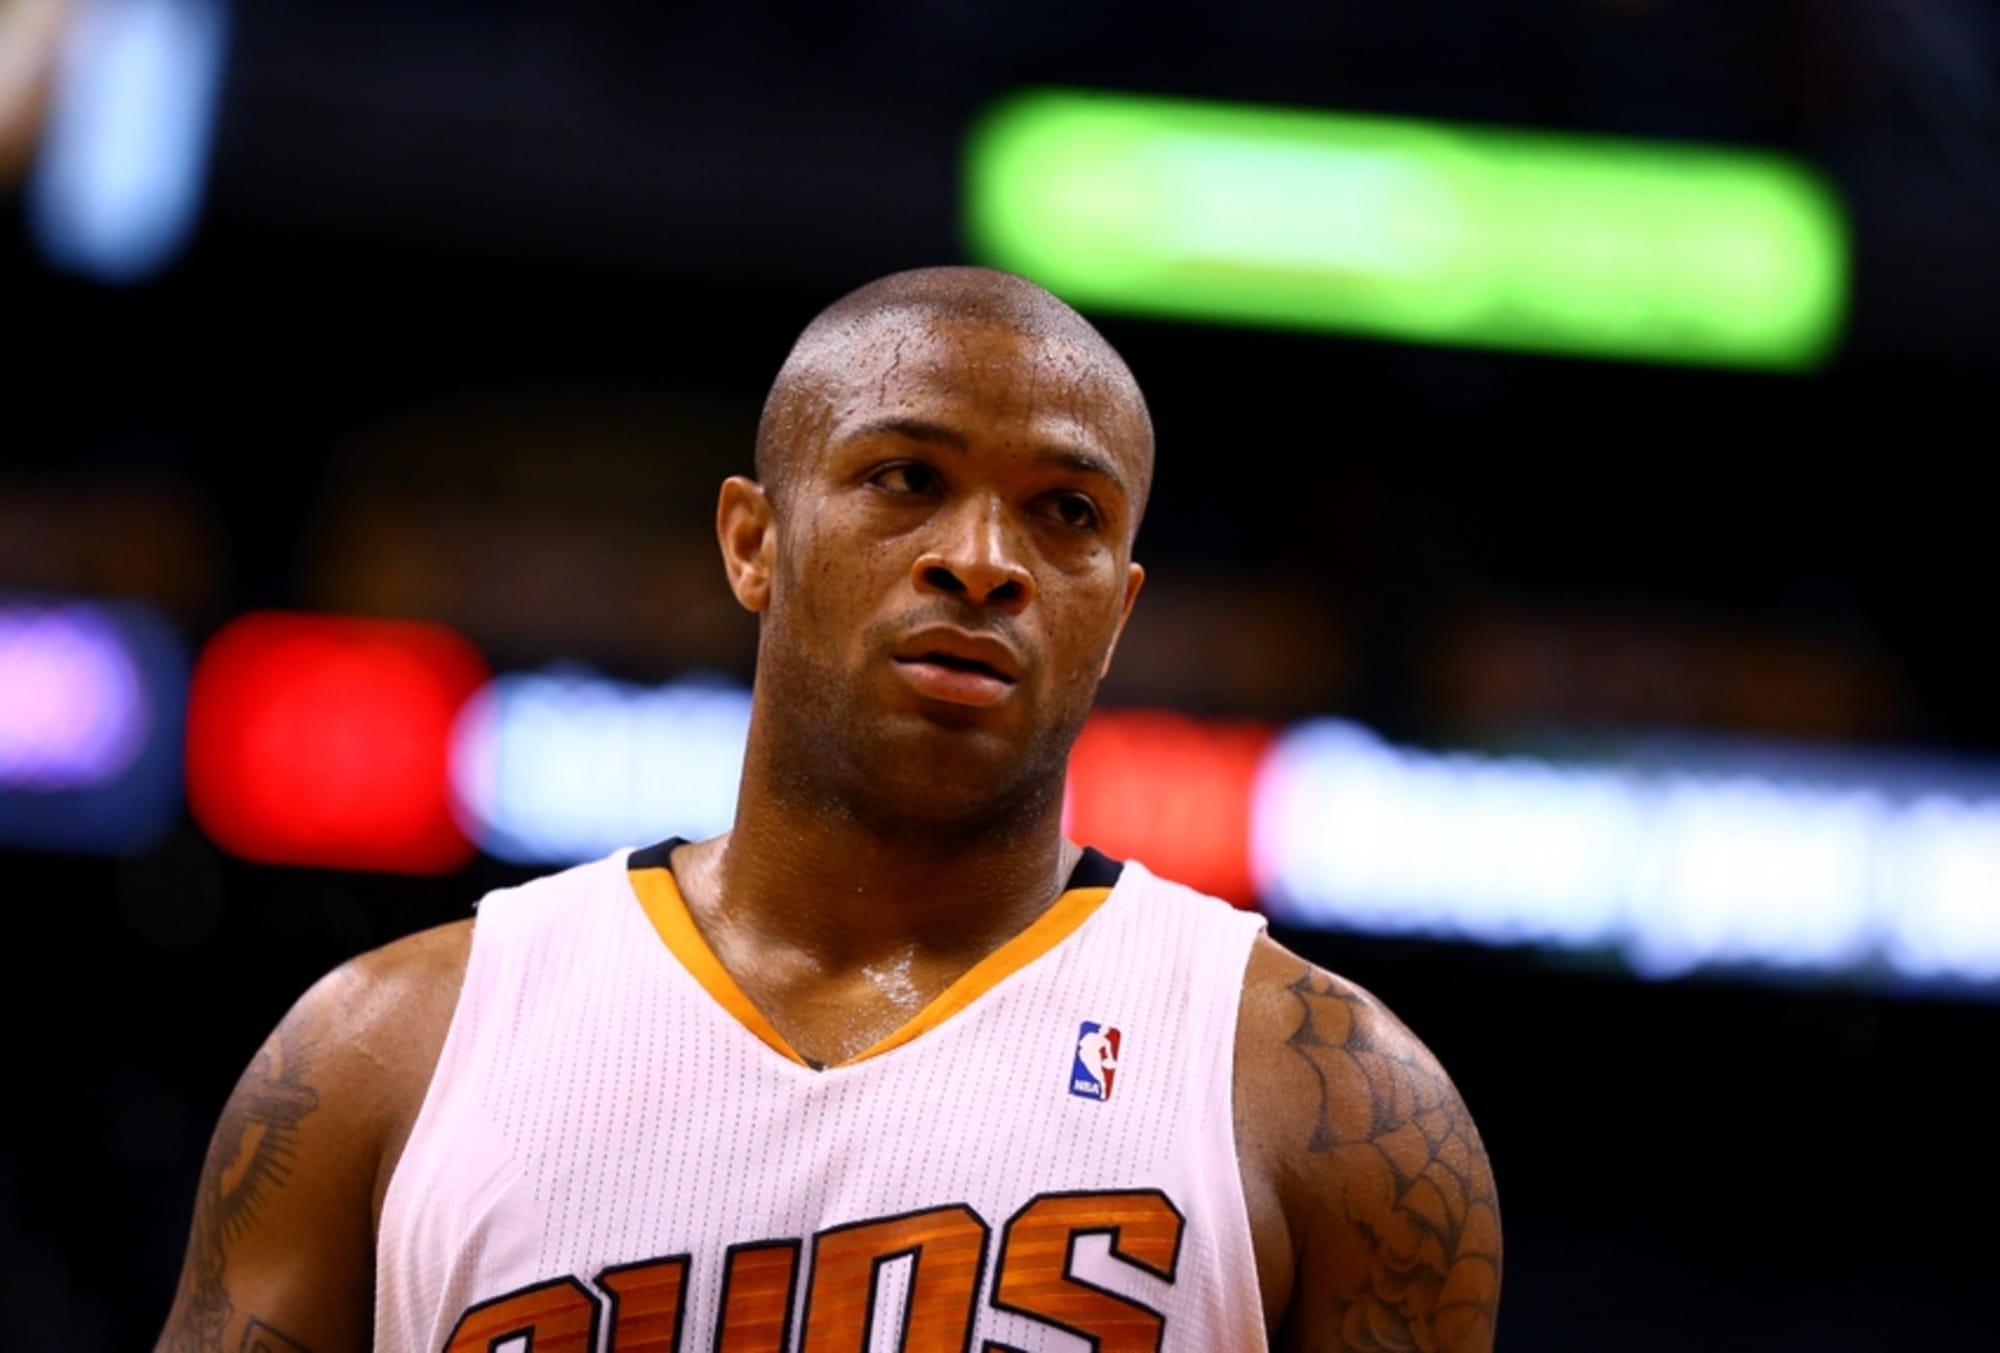 P.J. Tucker arrested on multiple extreme DUI charges